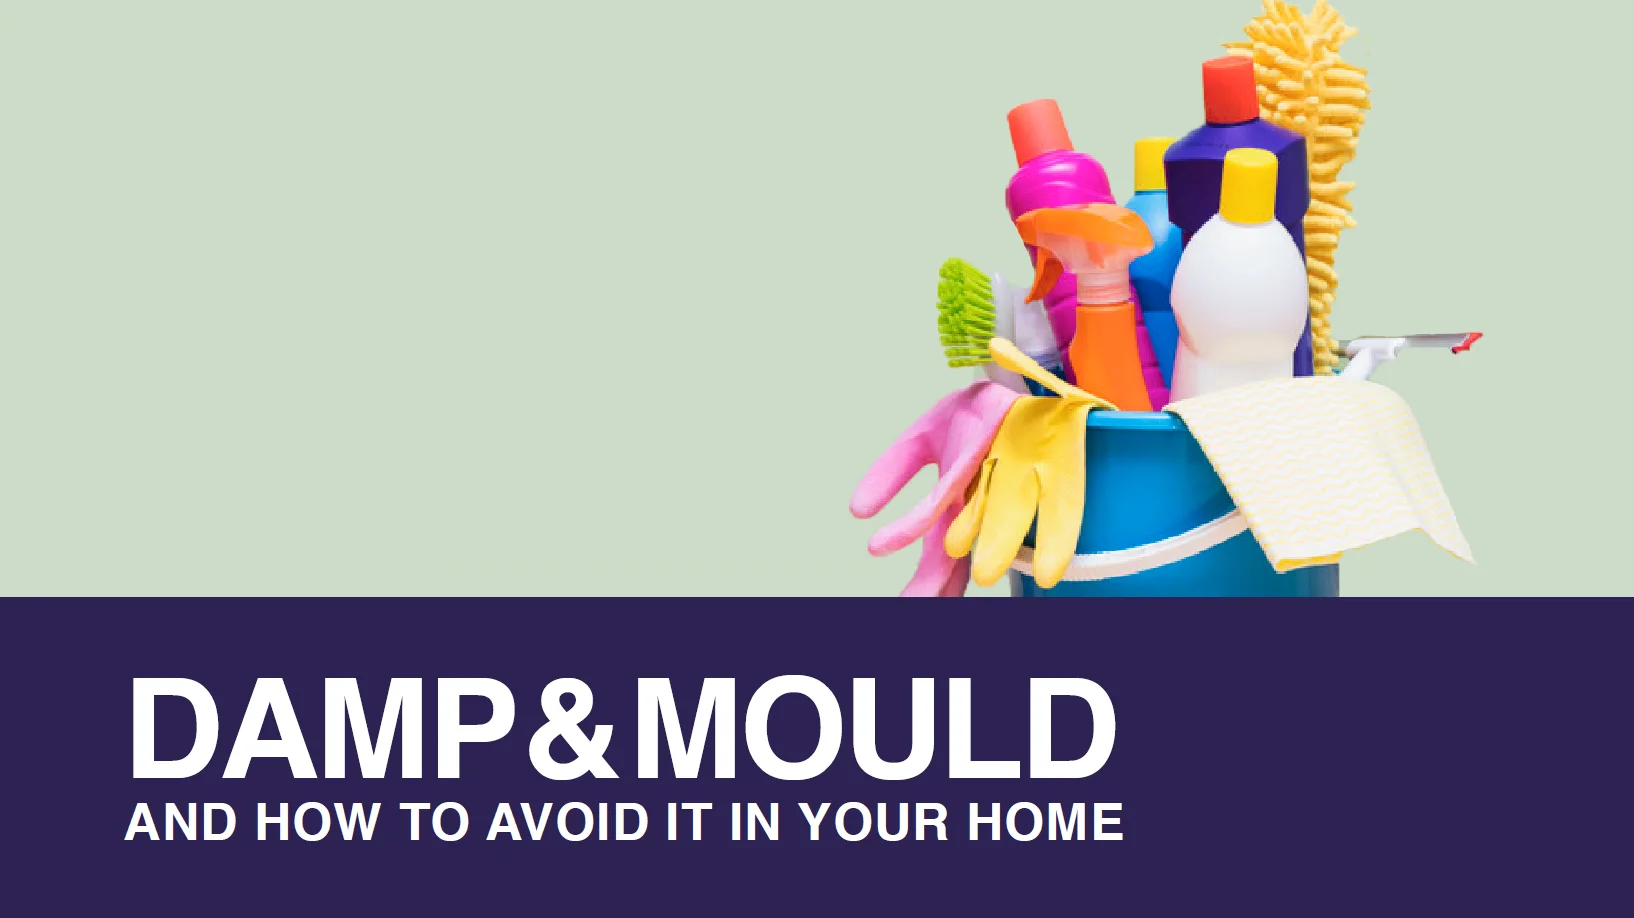 Landlord Help - What is damp & mould and how to deal with it! 